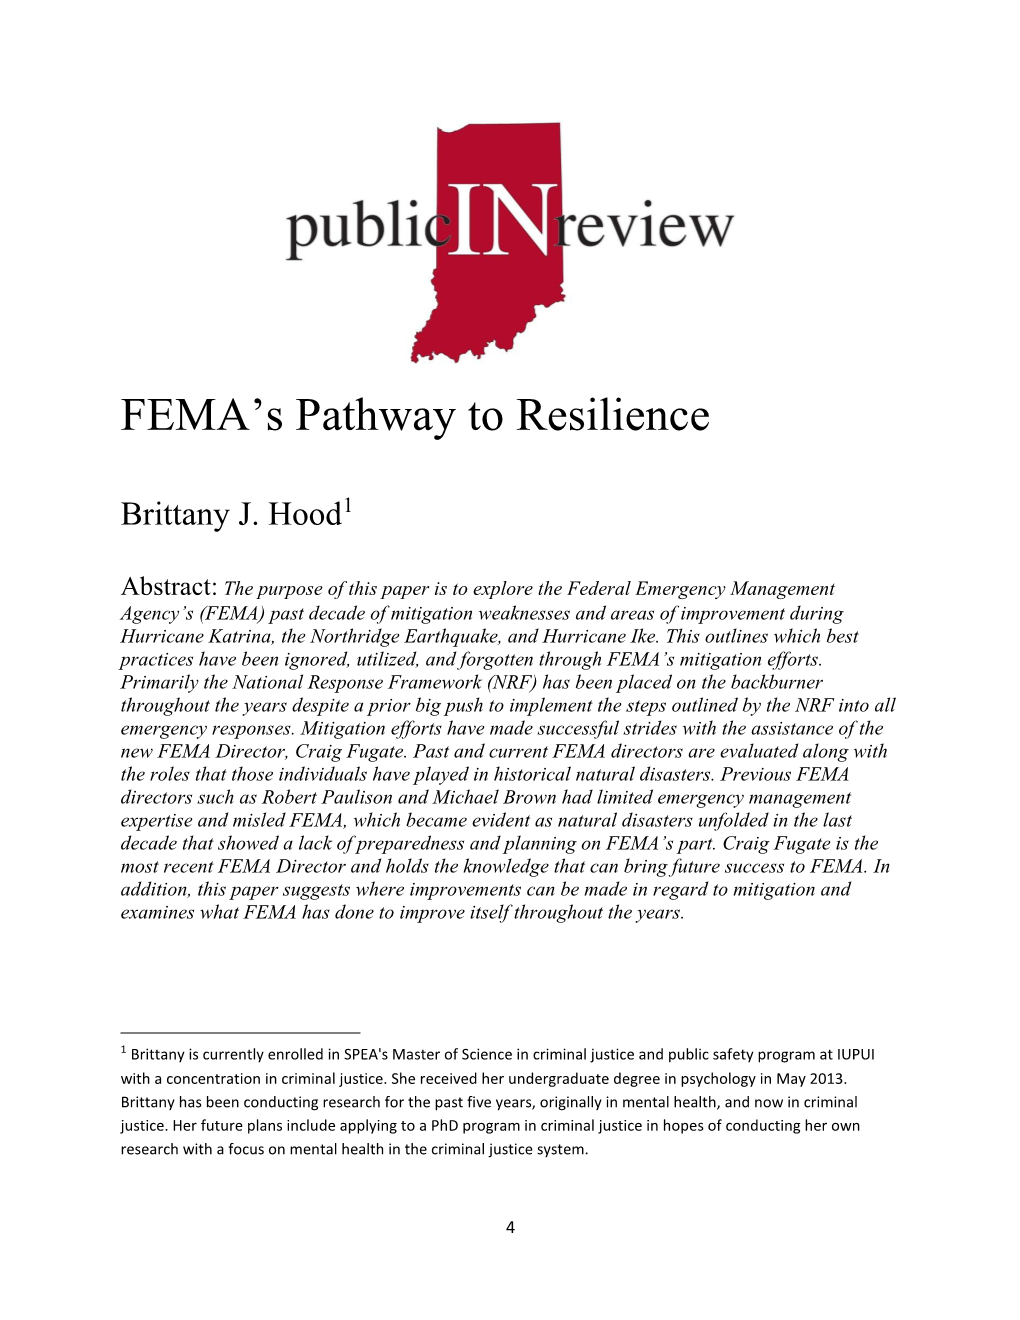 FEMA's Pathway to Resilience